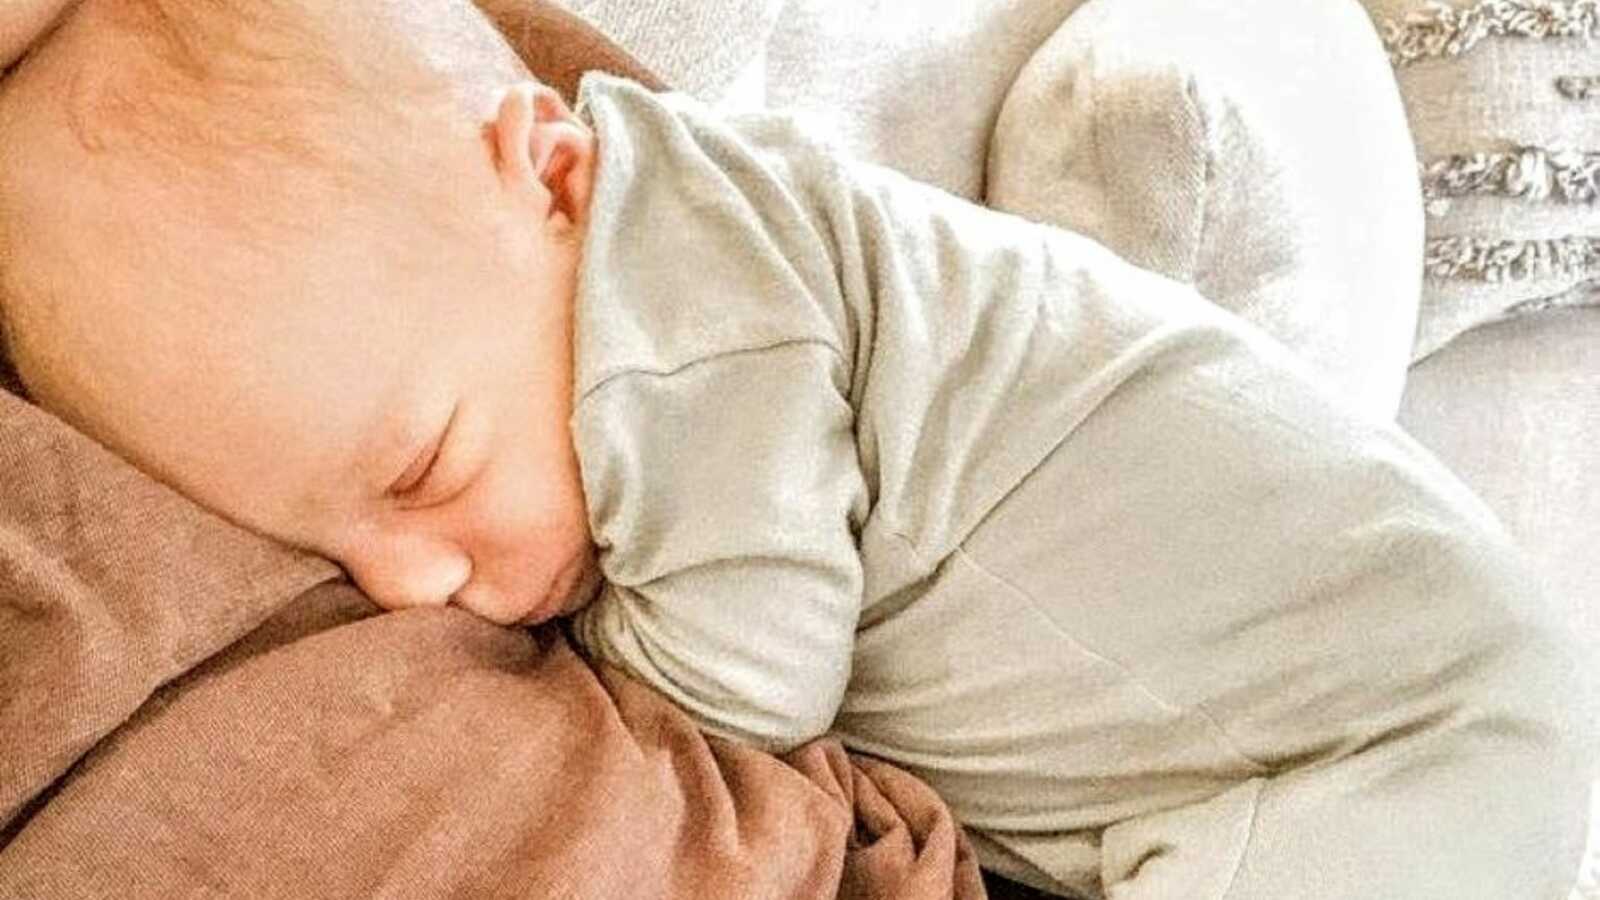 Newborn sleeps peacefully on his mom's chest and belly while wearing a neutral-colored onesie